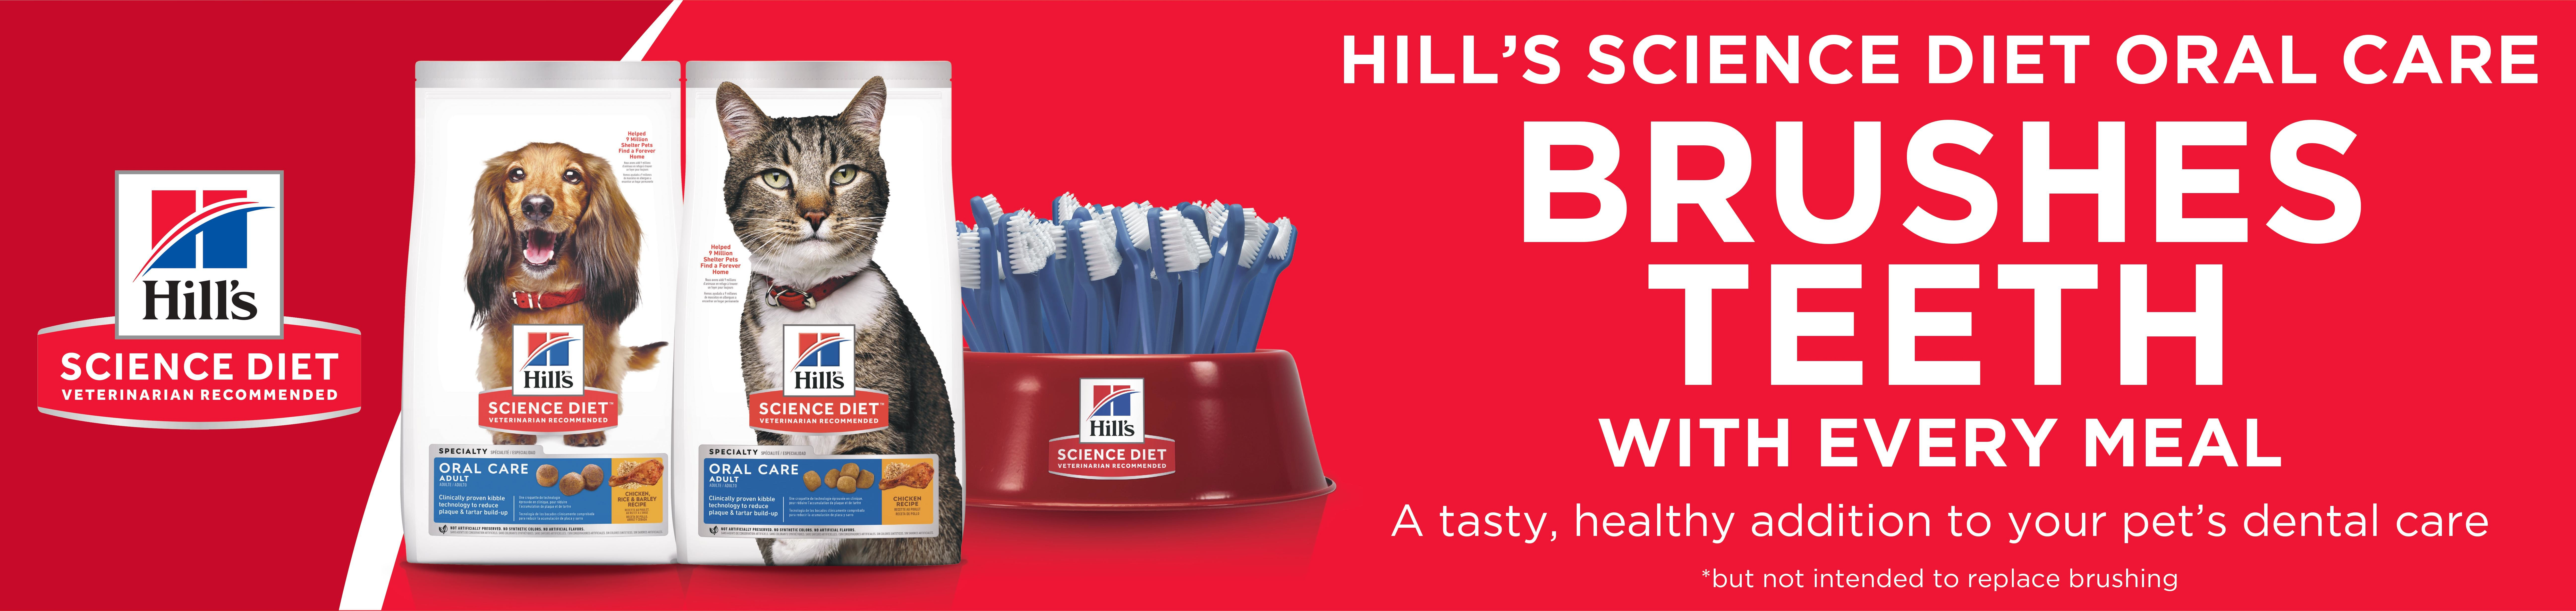 Hill's Science Diet oral care brushes teeth with every meal